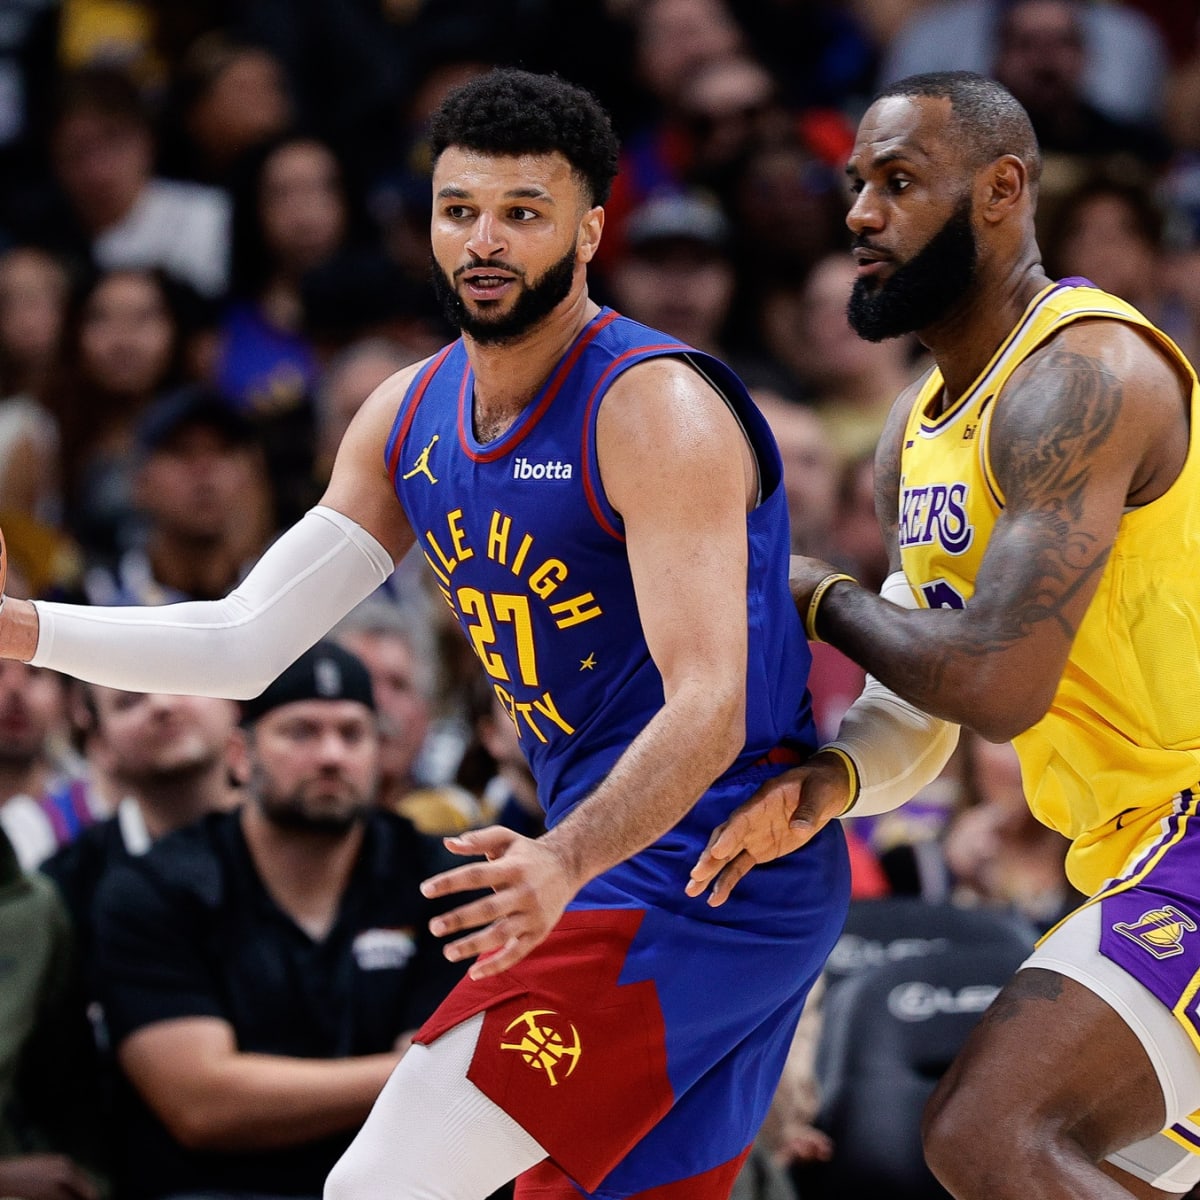 LeBron James proved he is not a team player with comments after Lakers loss  vs Nuggets